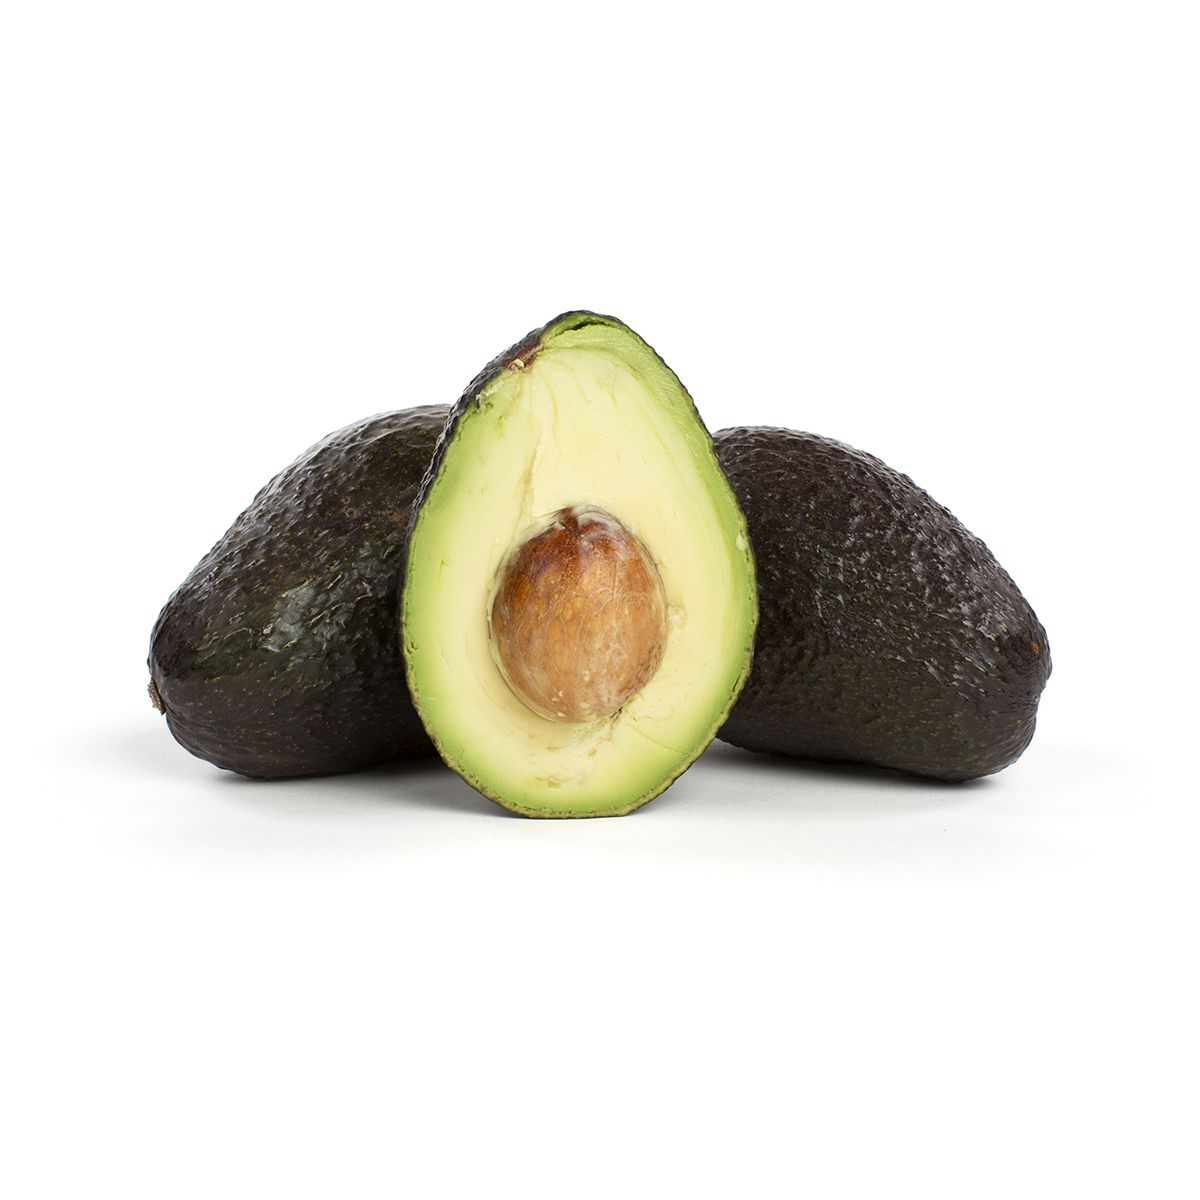 Avocados From Mexico Organic Firm Hass Avocados 48 ct